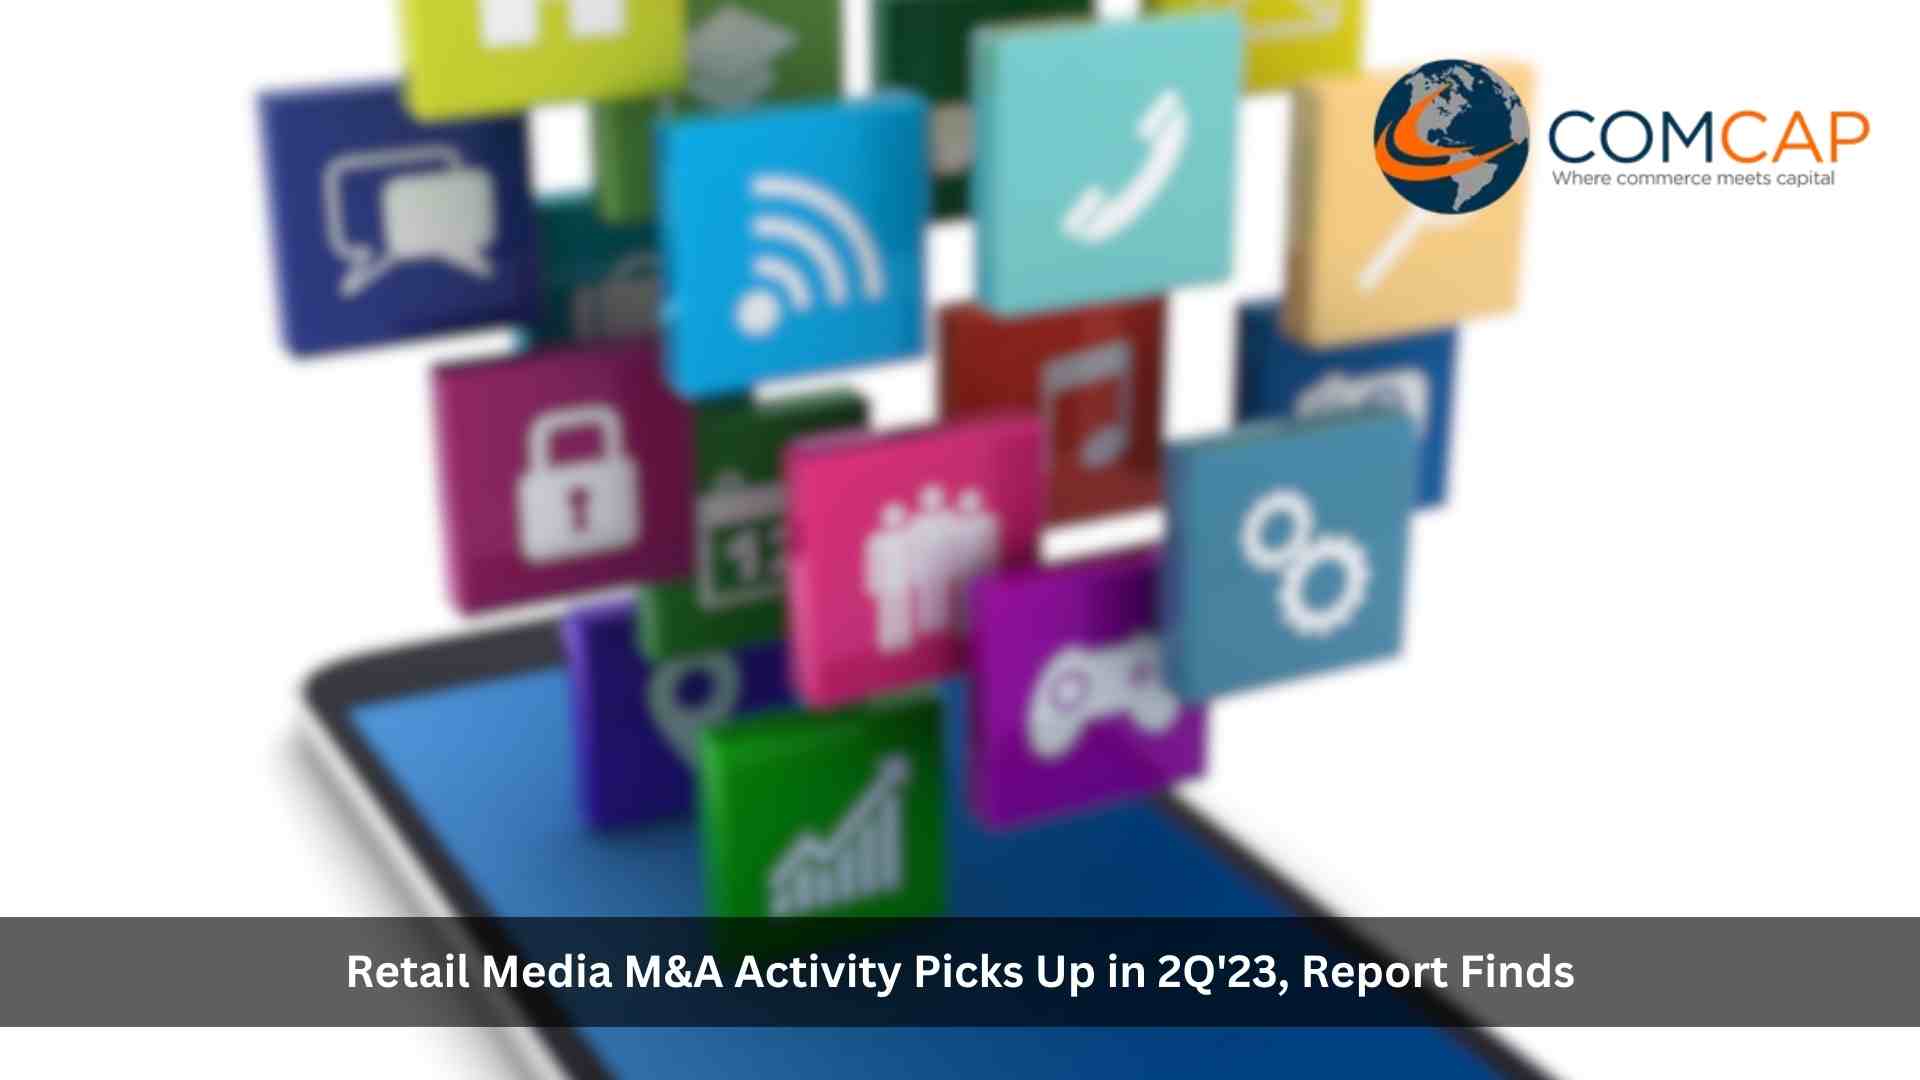 Retail Media M&A Activity Picks Up in 2Q'23 With Transaction Value Being the Highest in the Last Five Quarters, Report Finds